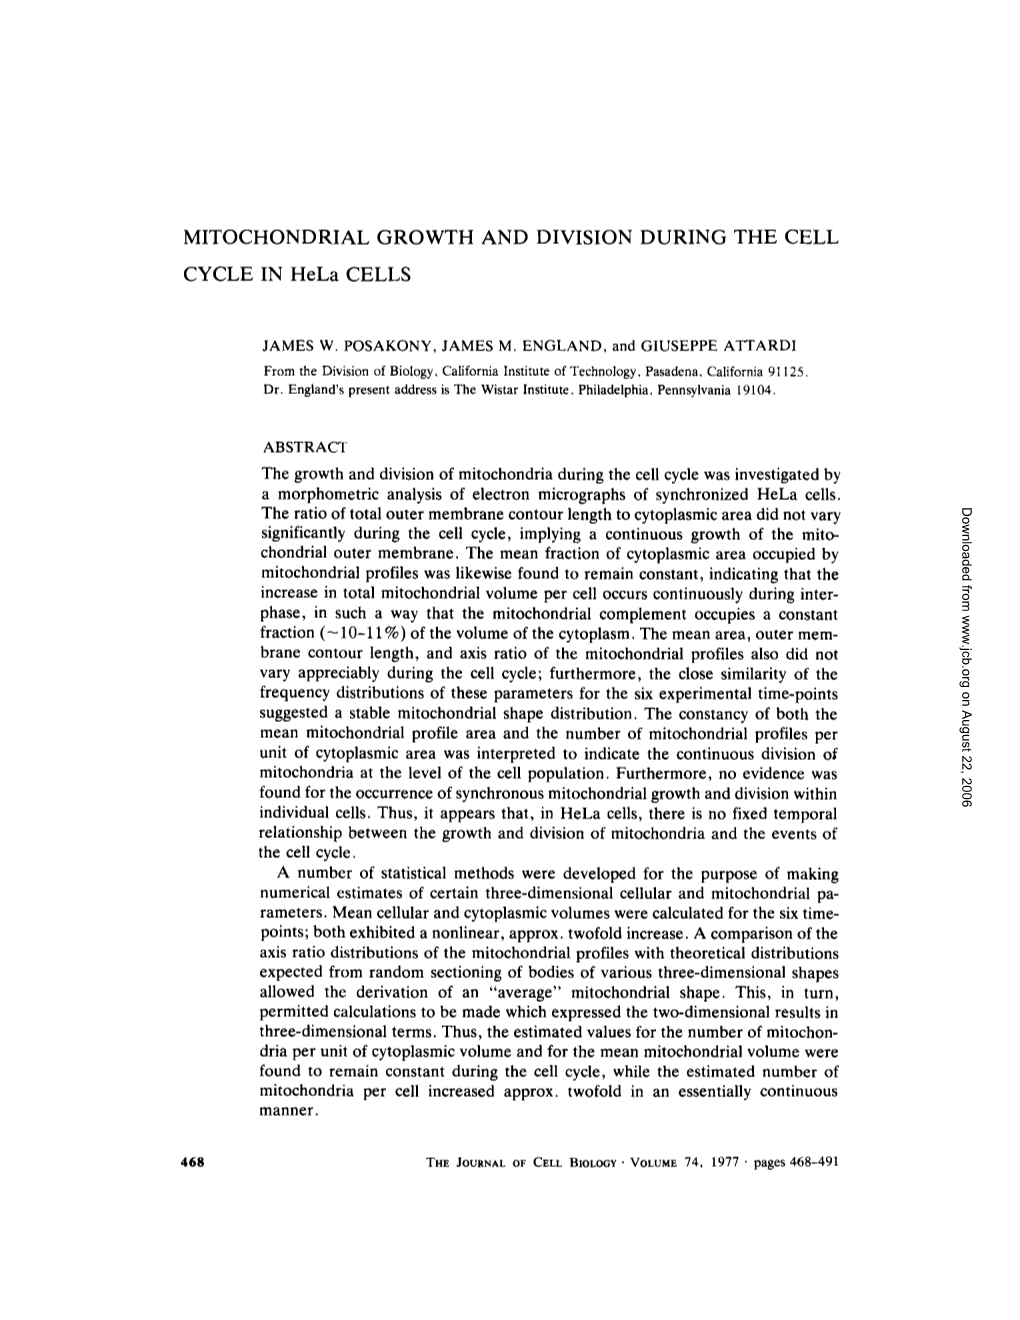 Mitochondrial Growth and Division During the Cell